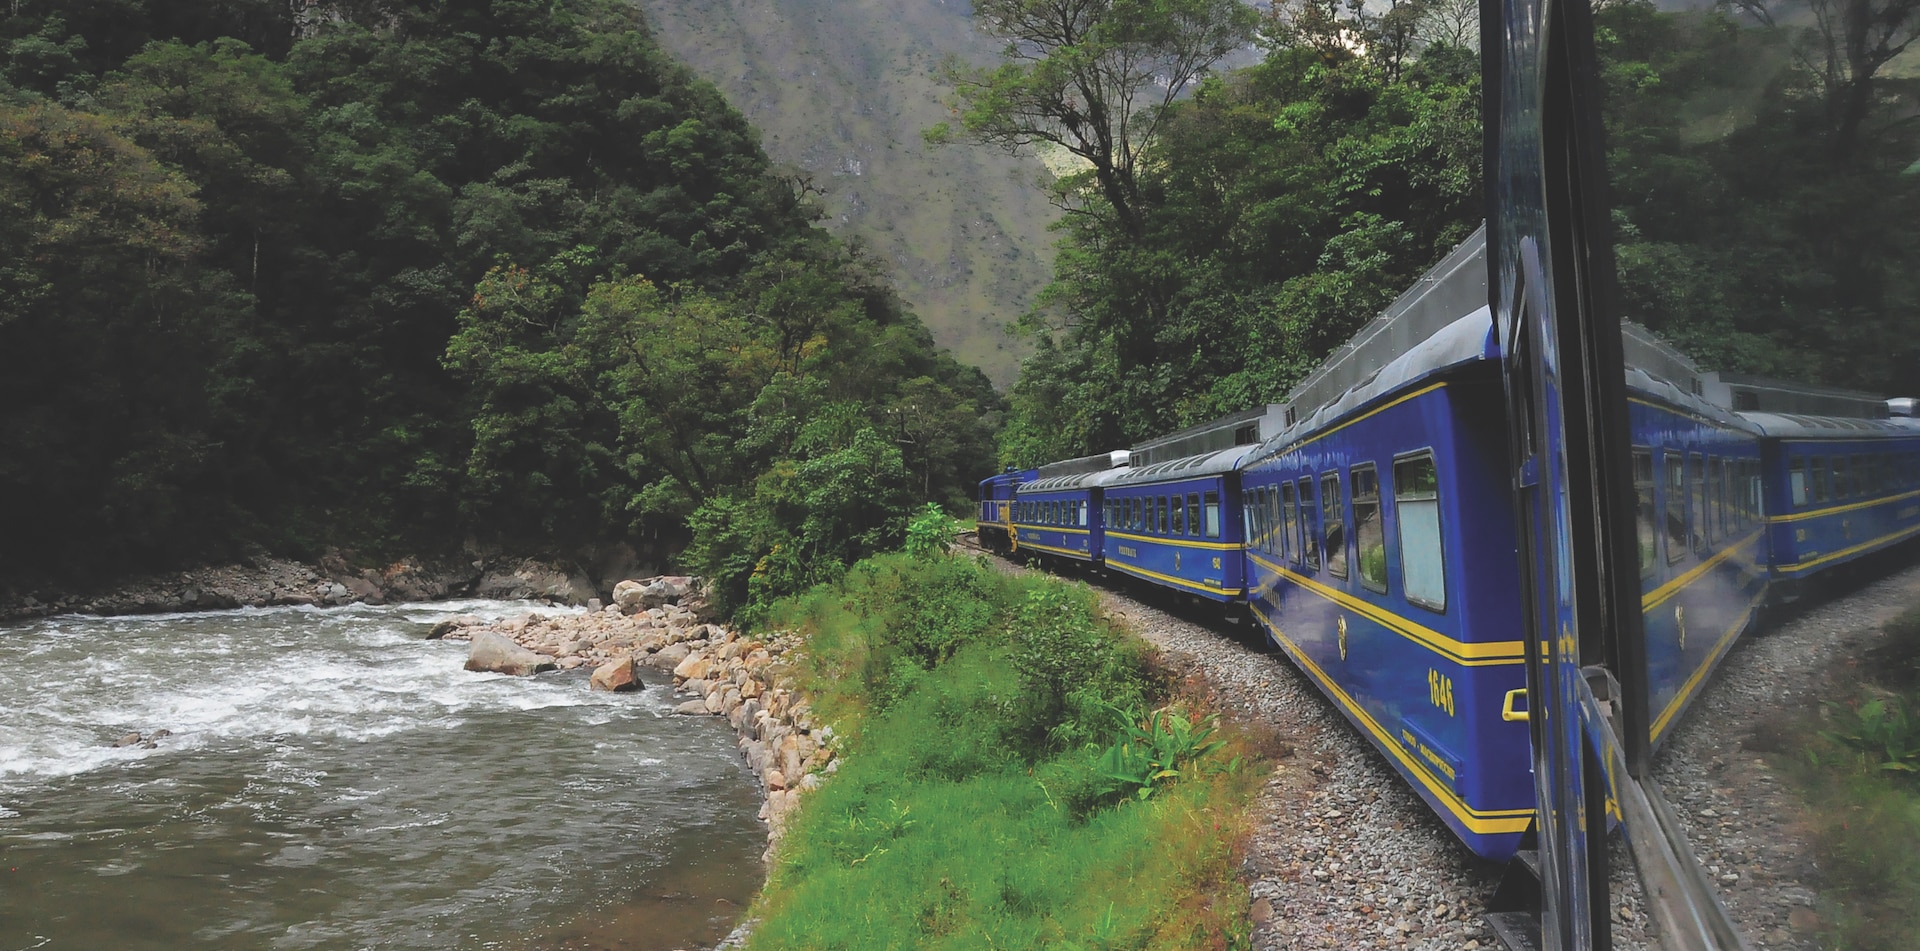 Peruvian train curving along the track amid mountains